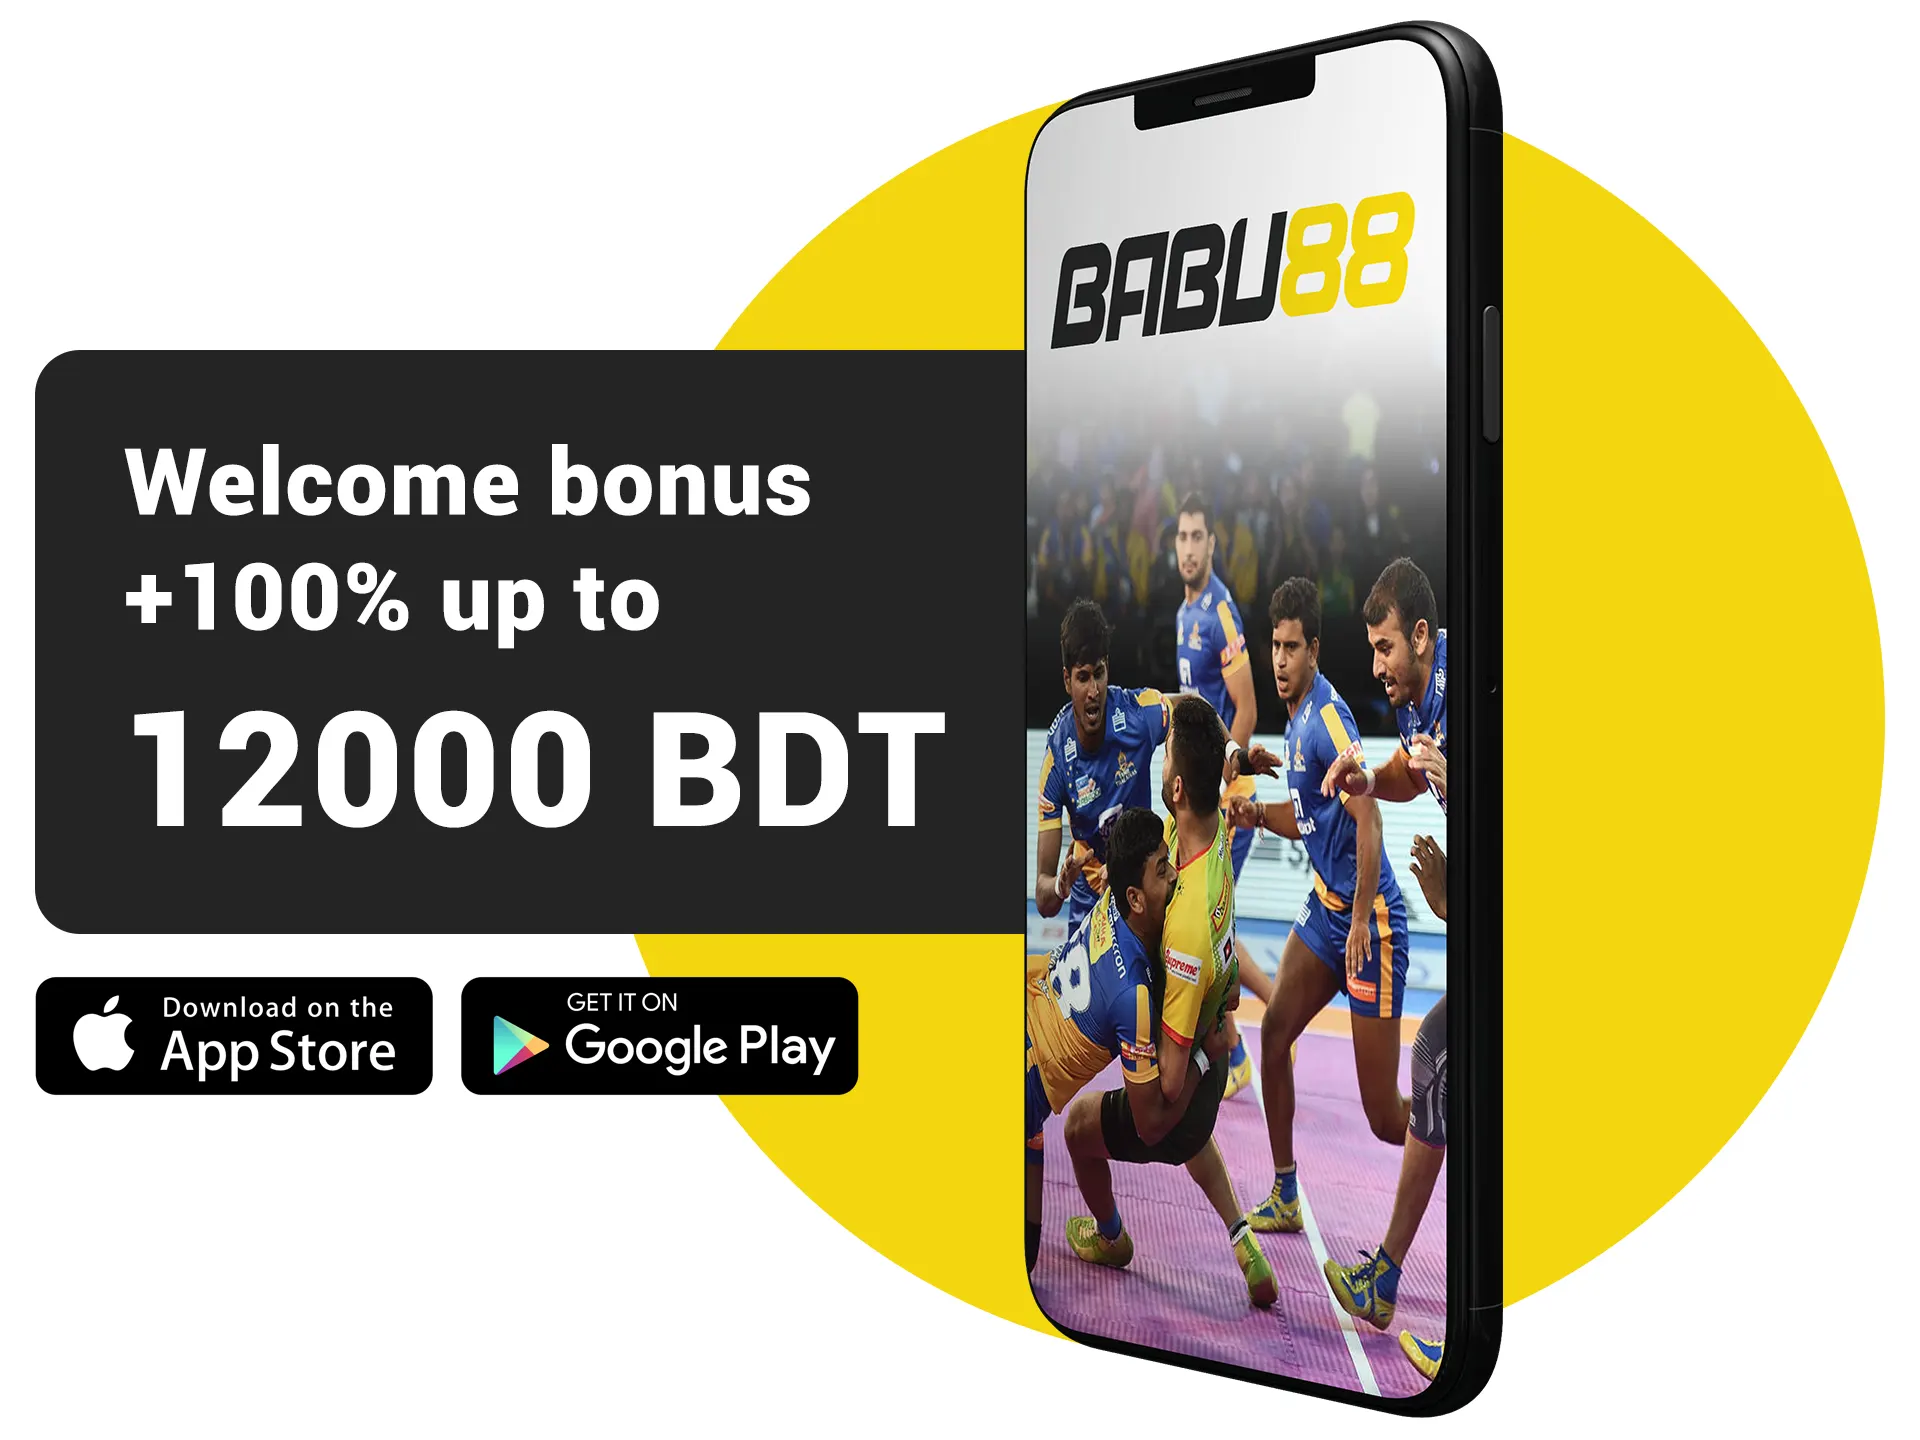 Spend your money by making bets on Kabaddi at the Babu88.